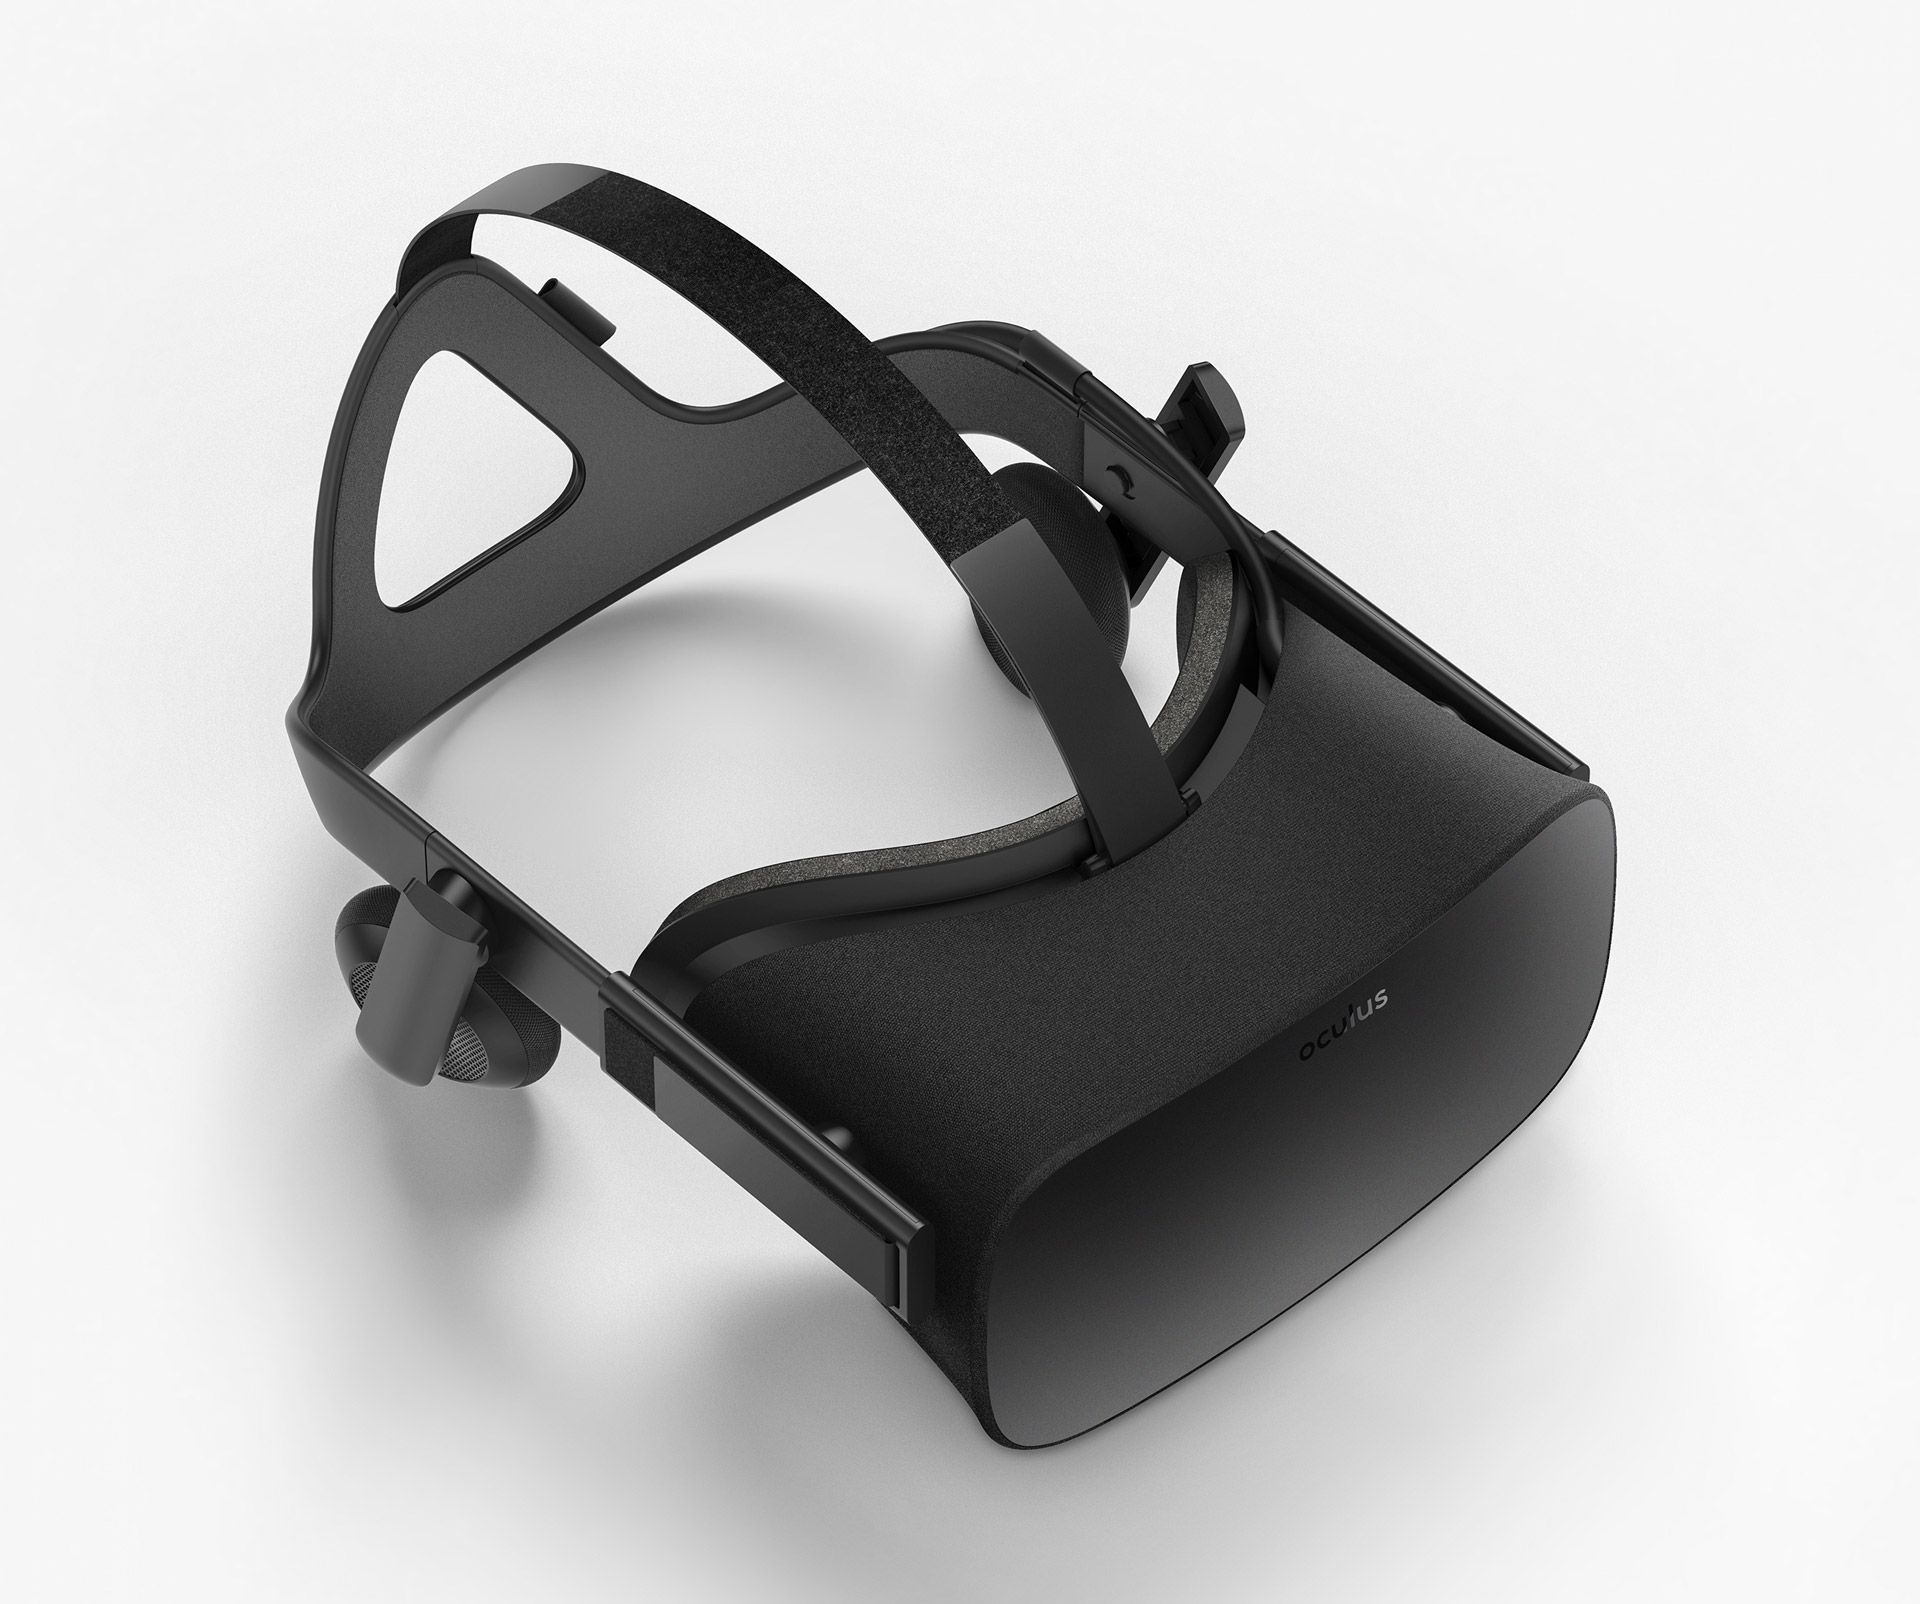 Why does the Oculus need USB ports?